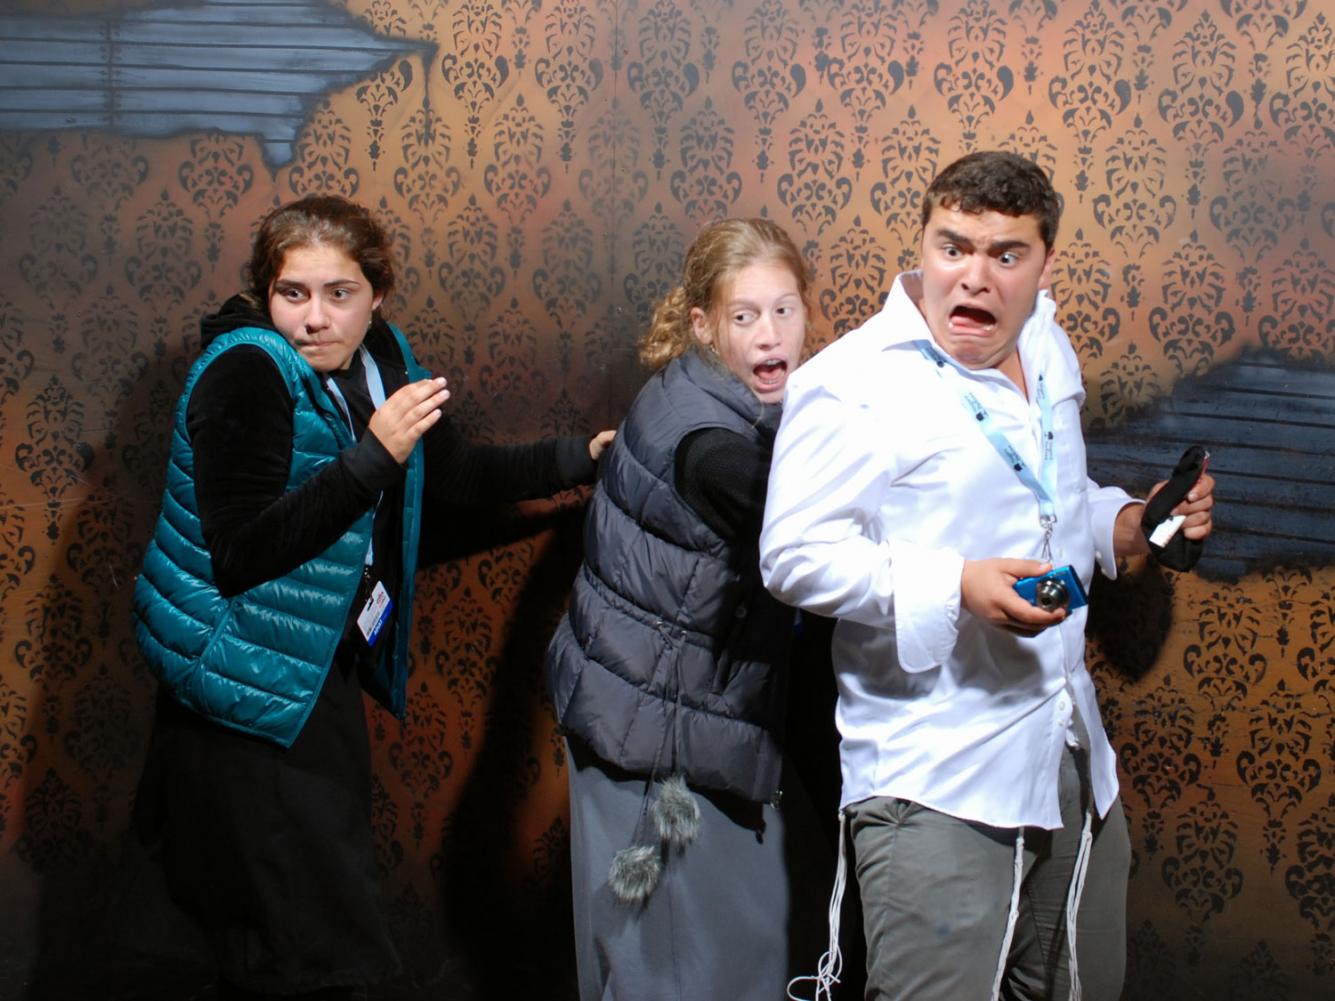 Nightmares Fear Factory Top 40 September 2013 pic0041